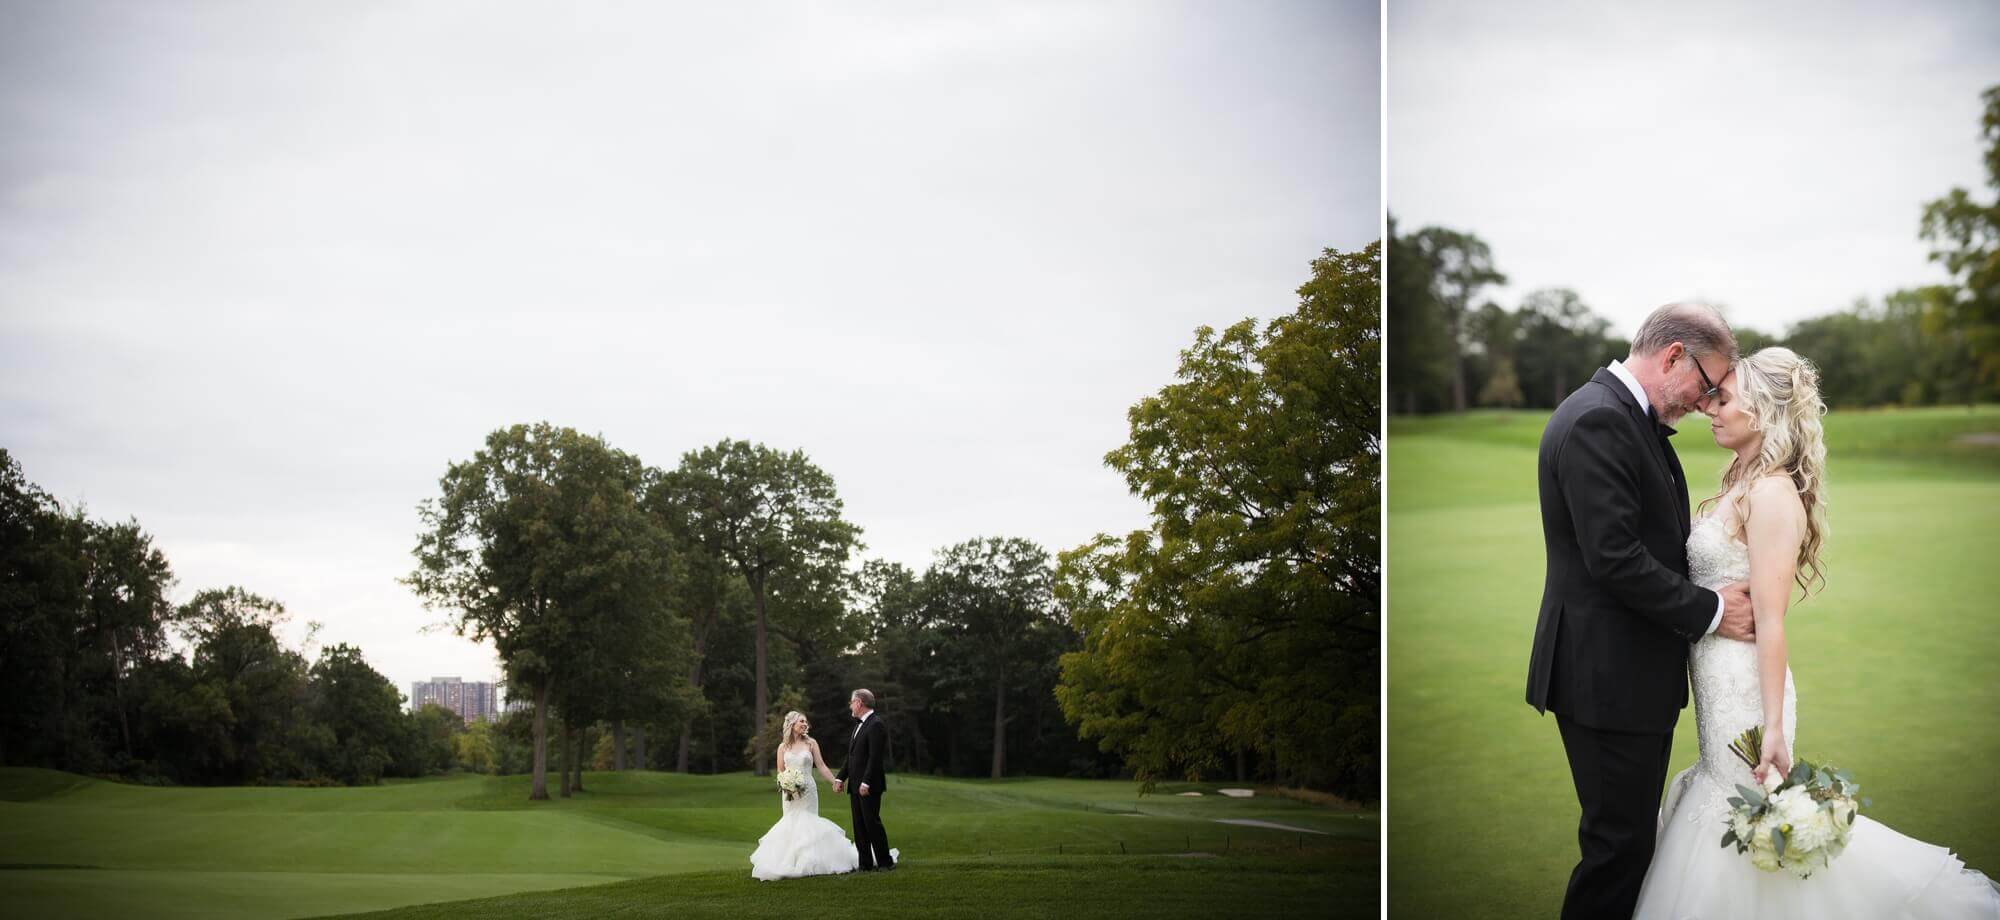 Portraits of the bride and groom on the green at the Lambton Golf & Country Club